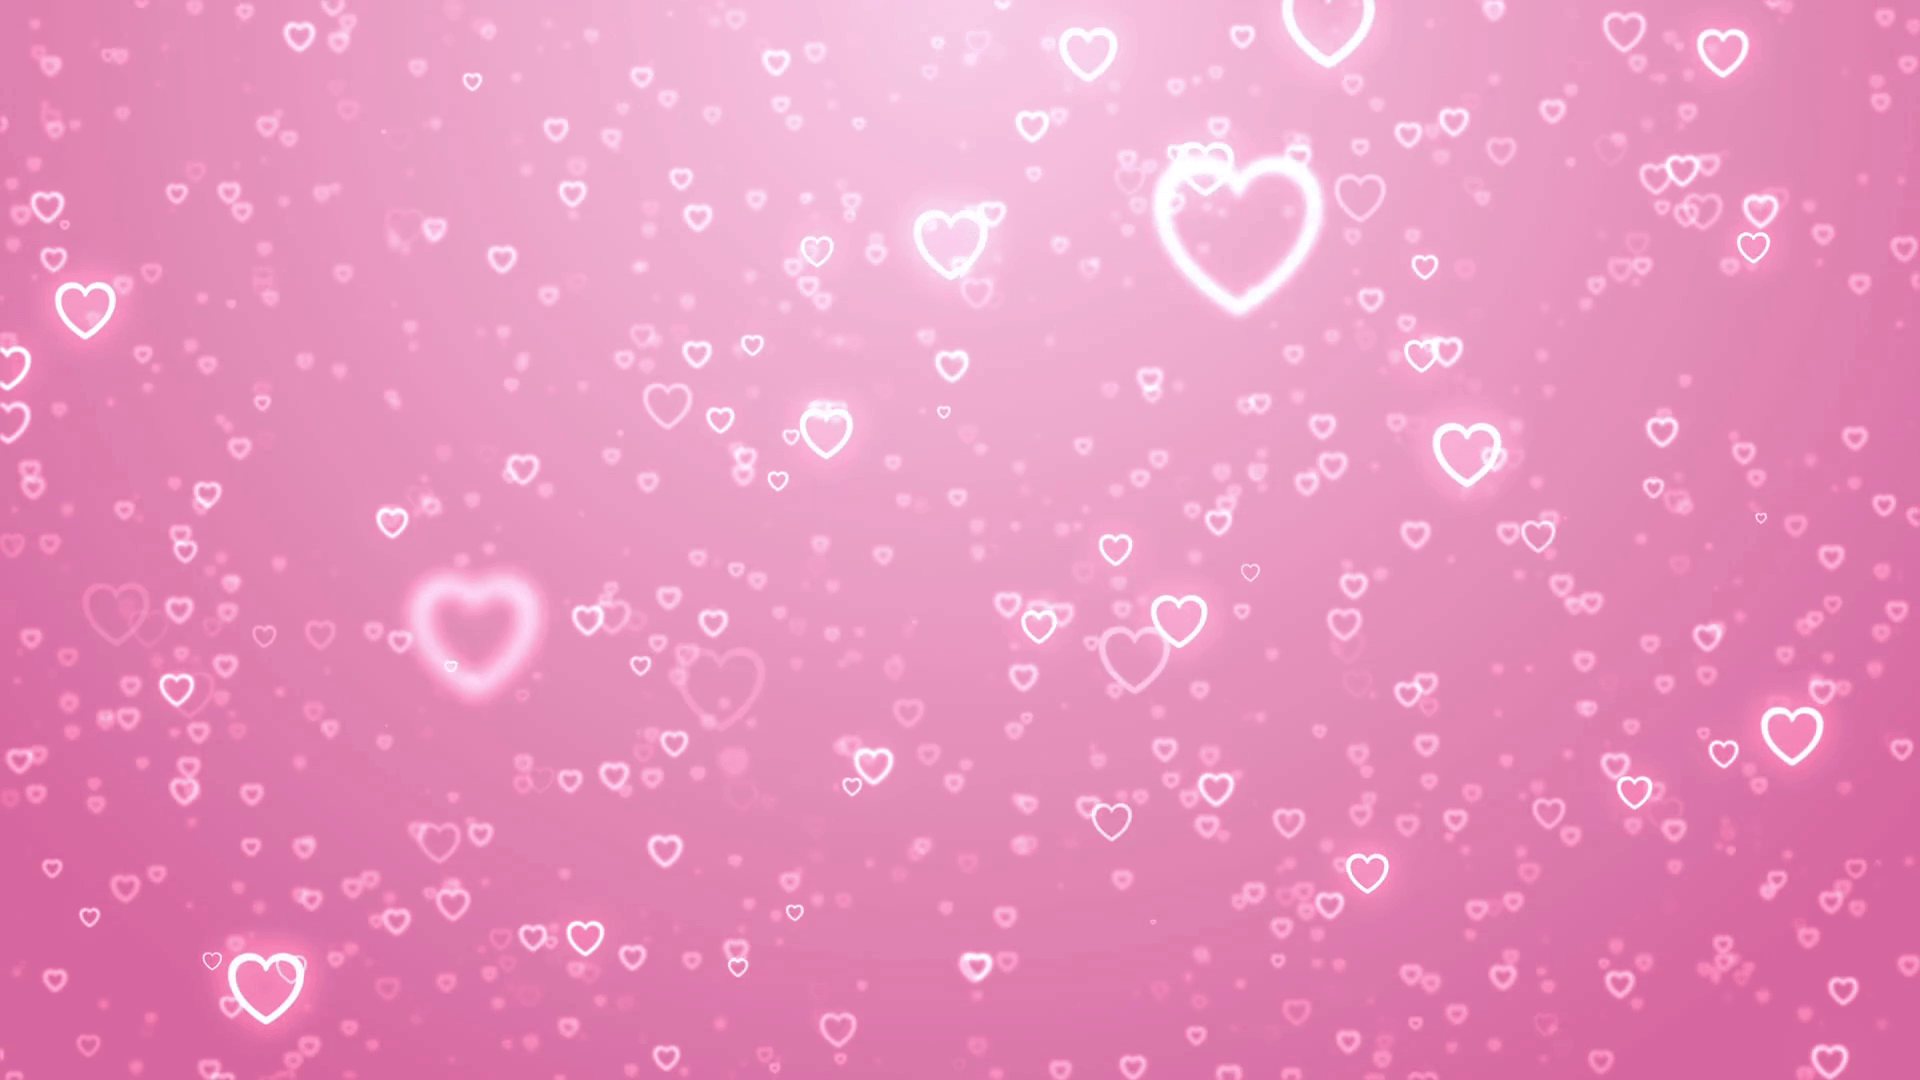 Valentine's day heart love wedding anniversary abstract particles